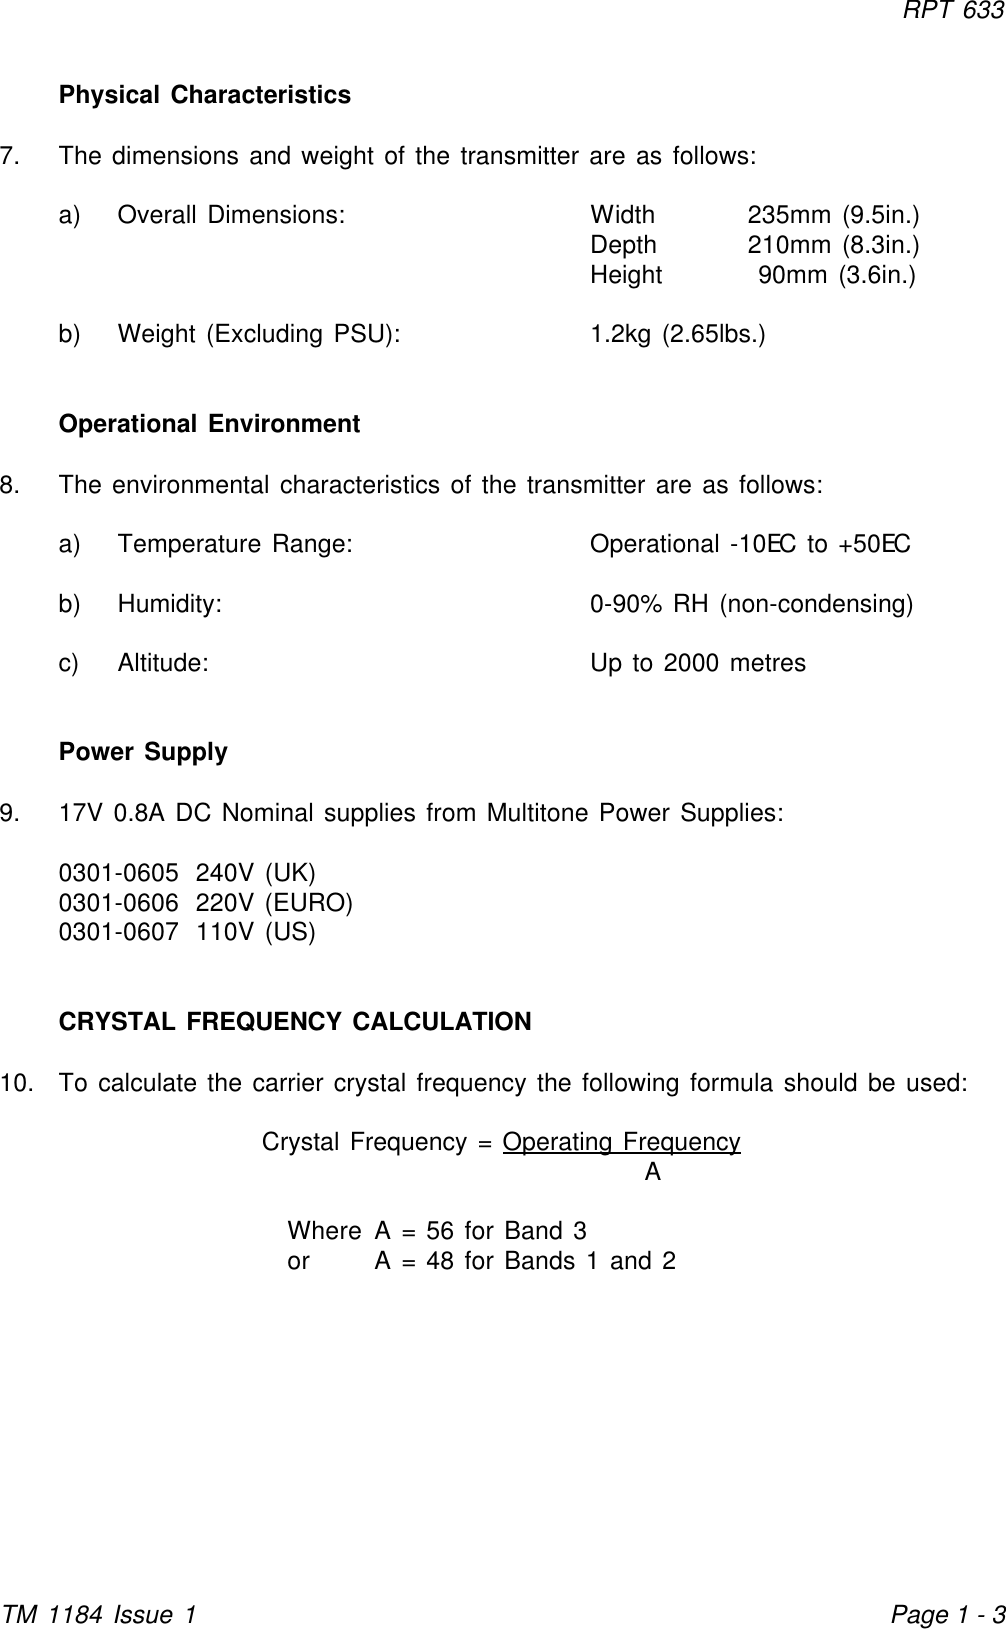 RPT 633TM 1184 Issue 1Page 1 - 3Physical Characteristics7. The dimensions and weight of the transmitter are as follows:a) Overall Dimensions: Width 235mm (9.5in.)Depth 210mm (8.3in.)Height  90mm (3.6in.)b) Weight (Excluding PSU): 1.2kg (2.65lbs.)Operational Environment8. The environmental characteristics of the transmitter are as follows:a) Temperature Range: Operational -10EC to +50ECb) Humidity: 0-90% RH (non-condensing)c) Altitude: Up to 2000 metresPower Supply9. 17V 0.8A DC Nominal supplies from Multitone Power Supplies:0301-0605 240V (UK)0301-0606 220V (EURO)0301-0607 110V (US)CRYSTAL FREQUENCY CALCULATION10. To calculate the carrier crystal frequency the following formula should be used:Crystal Frequency = Operating FrequencyAWhere A = 56 for Band 3or A = 48 for Bands 1 and 2